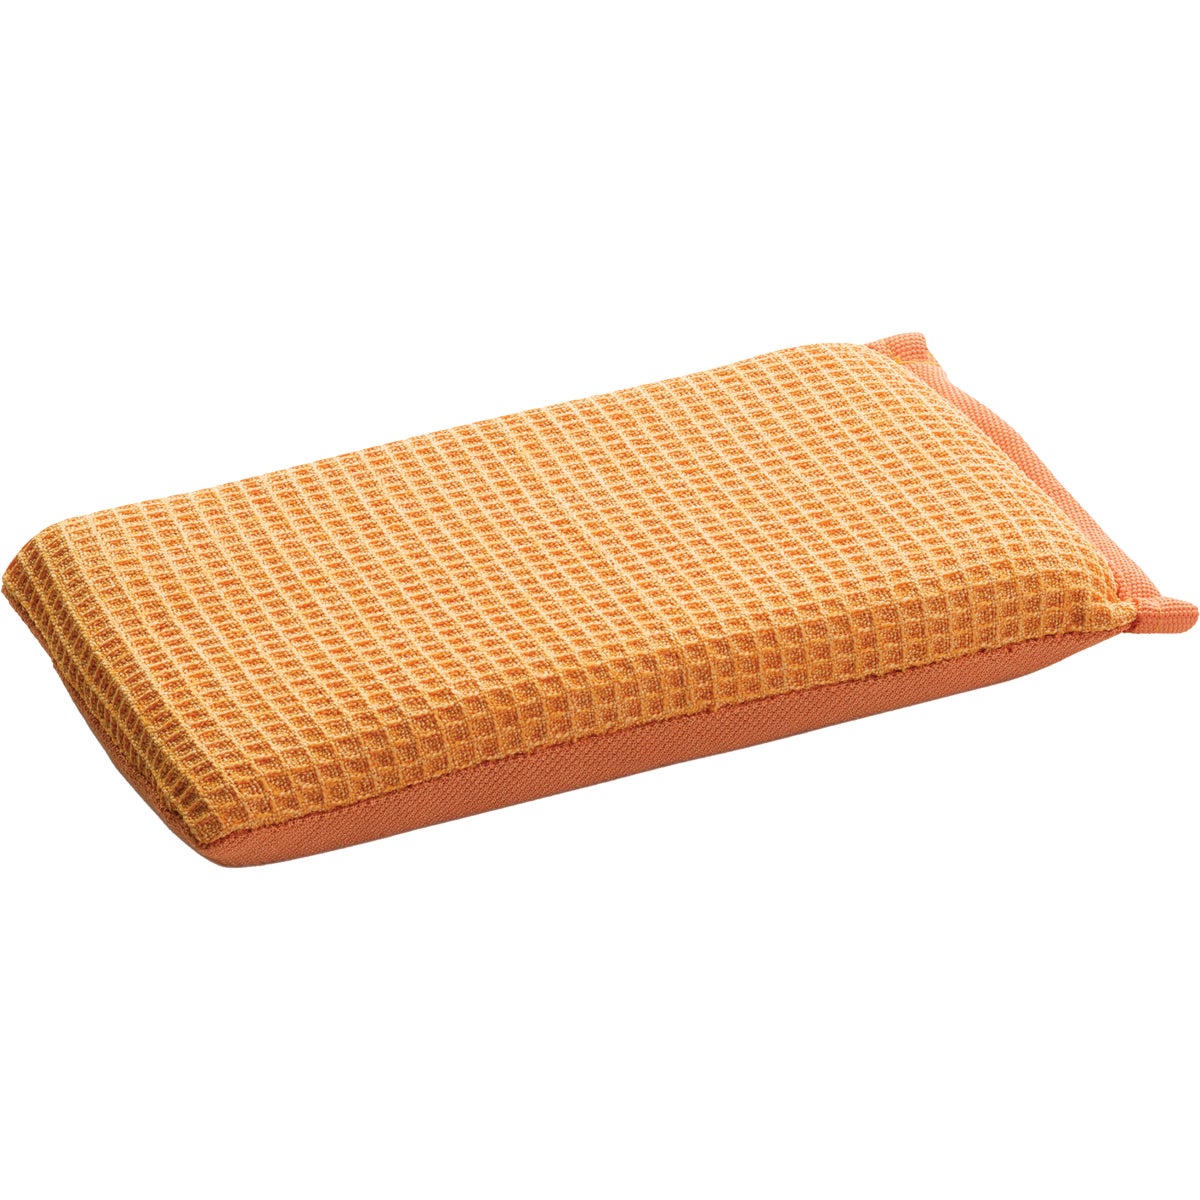 E-Cloth 4 In. x 6.75 In. Window Dynamo Cleansing Pad